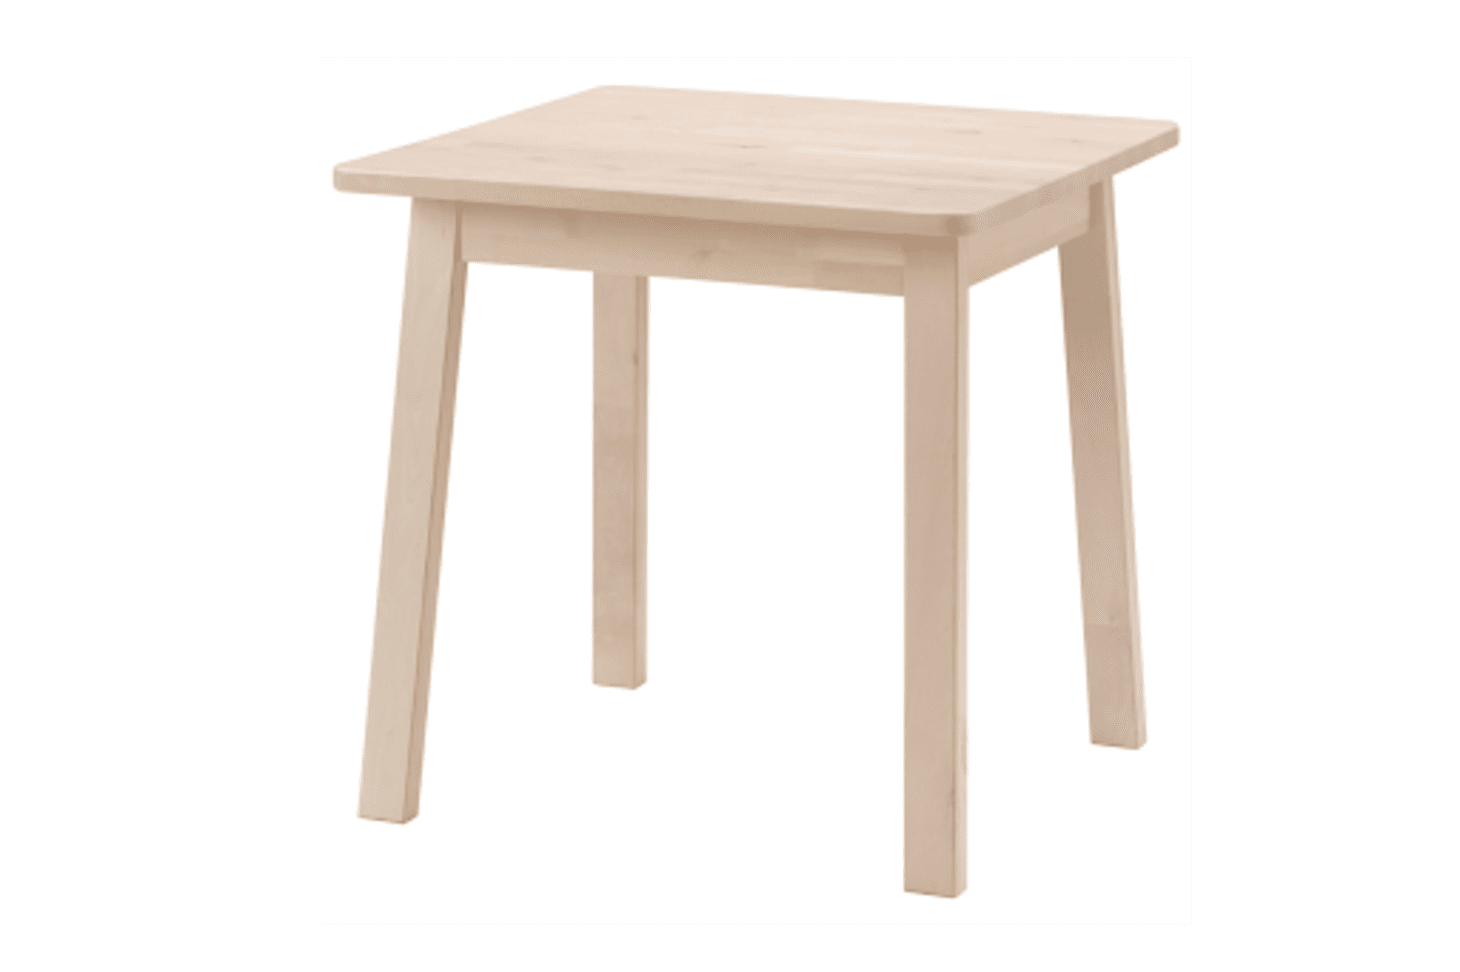 Best Size Table For Small Dining Room